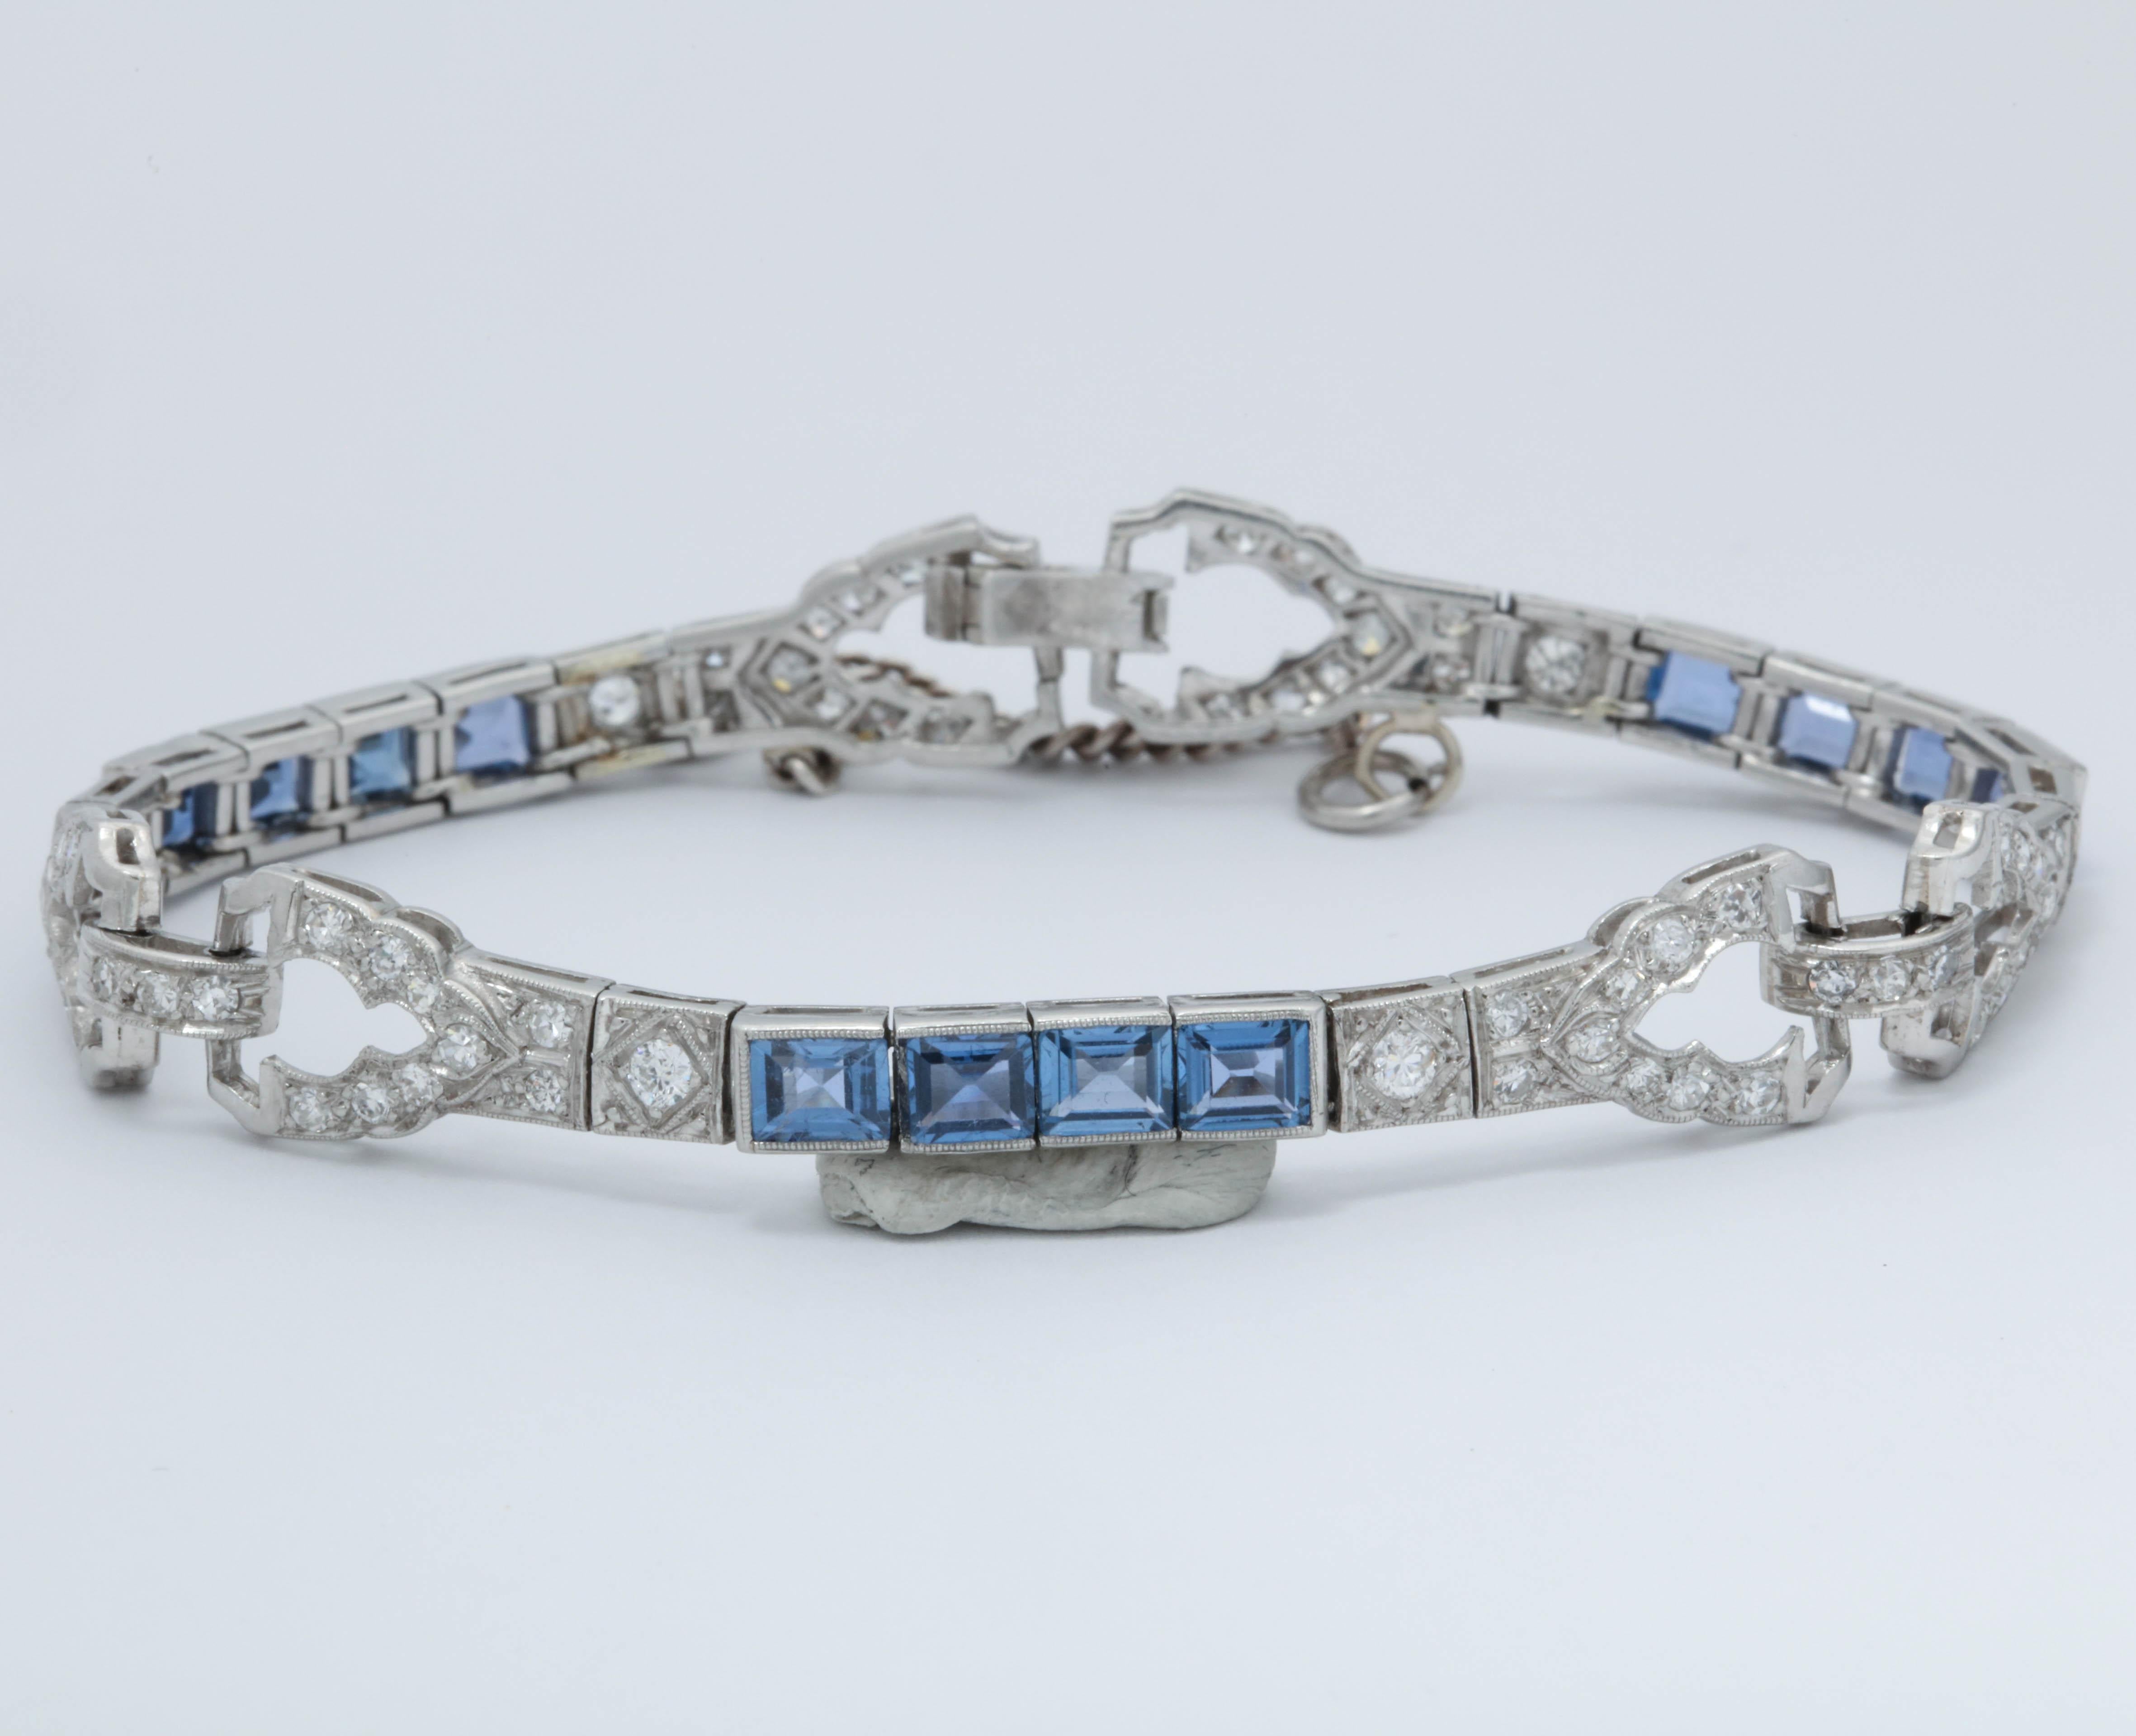 One Ladies Flexible Platinum Link Bracelet Designed With {12} Emerald Cut Ceylon Color Sapphires Weighing Approximately 3 Carats Total Weight. Flexible Link Bracelet Is Further Designed With Numerous Antique Diamonds Weighing Approximately 2.50 cts